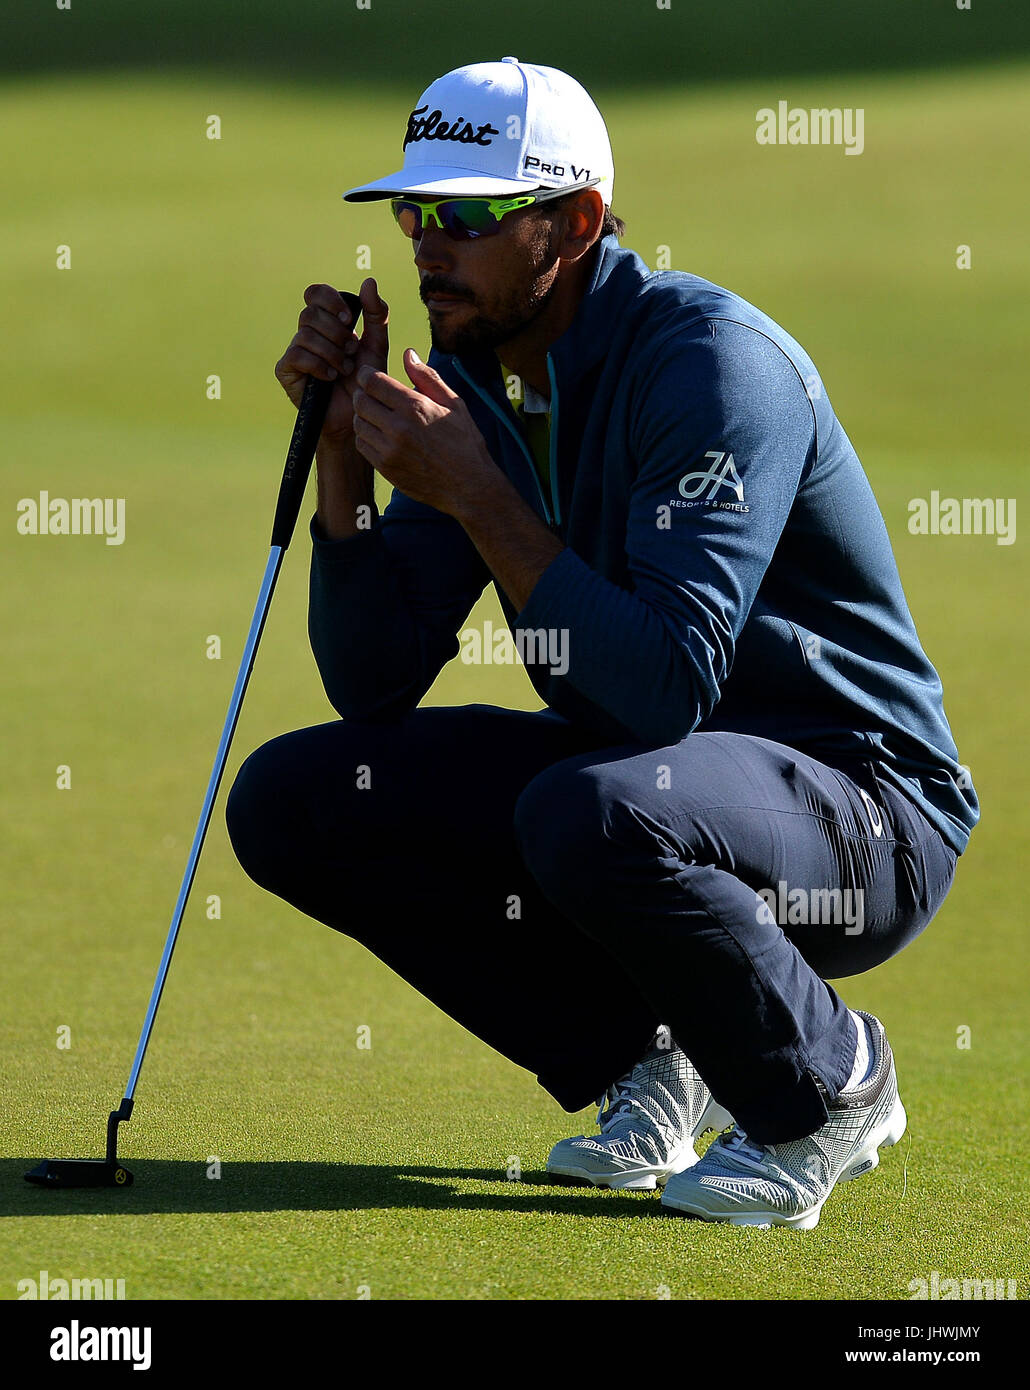 Spain's Rafa Cabrera Bello, winner of the Aberdeen Asset Management Scottish Open, looks over a putt at the 18th during day four of the 2017 Aberdeen Asset Management Scottish Open at Dundonald Links, Troon. Stock Photo